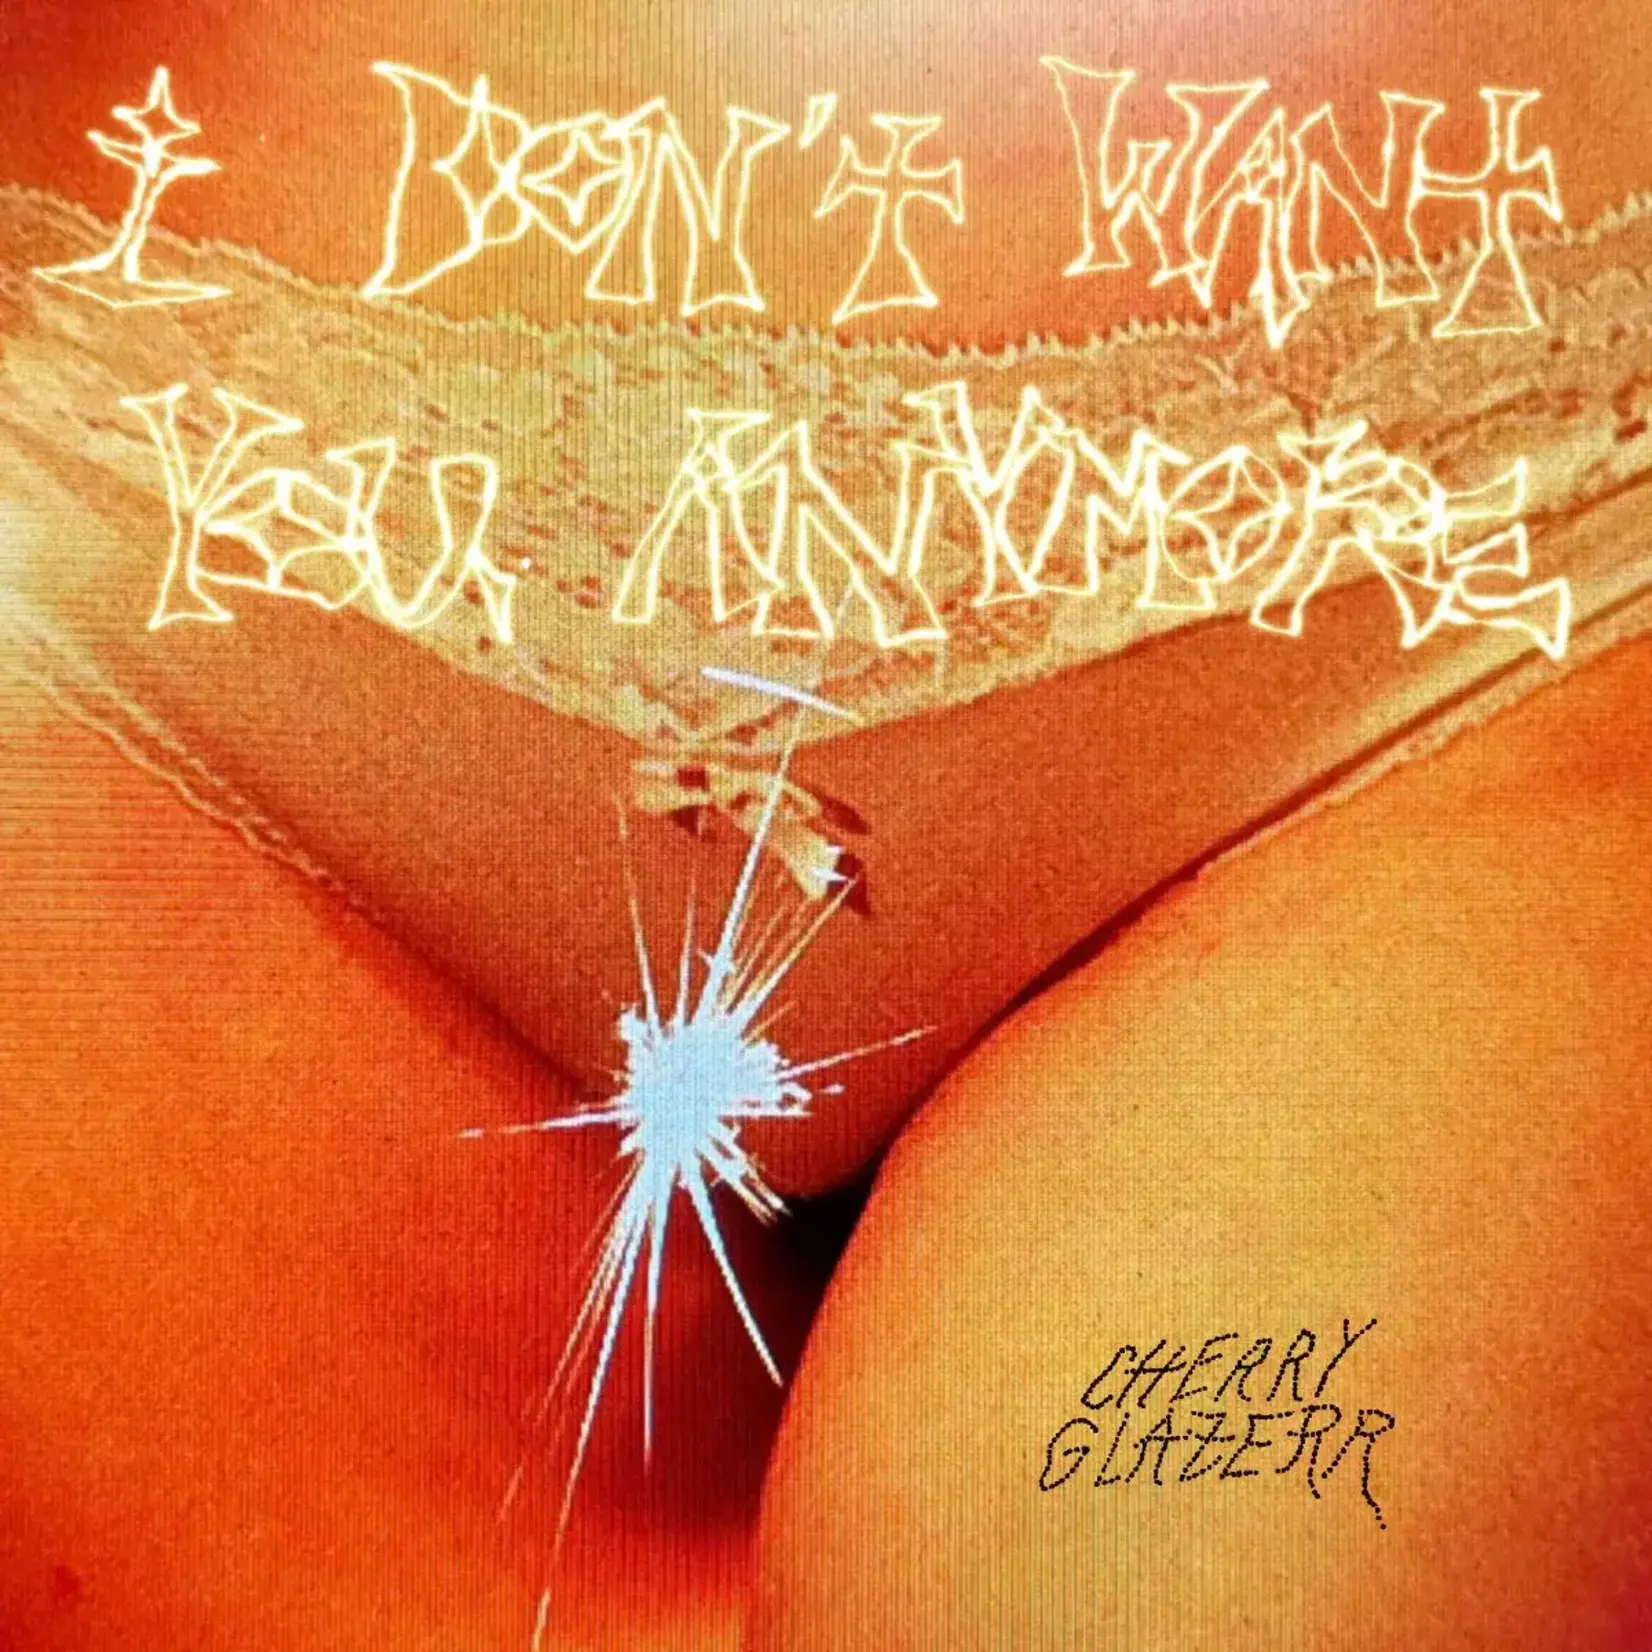 [New] Cherry Glazerr - I Don't Want You Anymore (crystal clear vinyl)